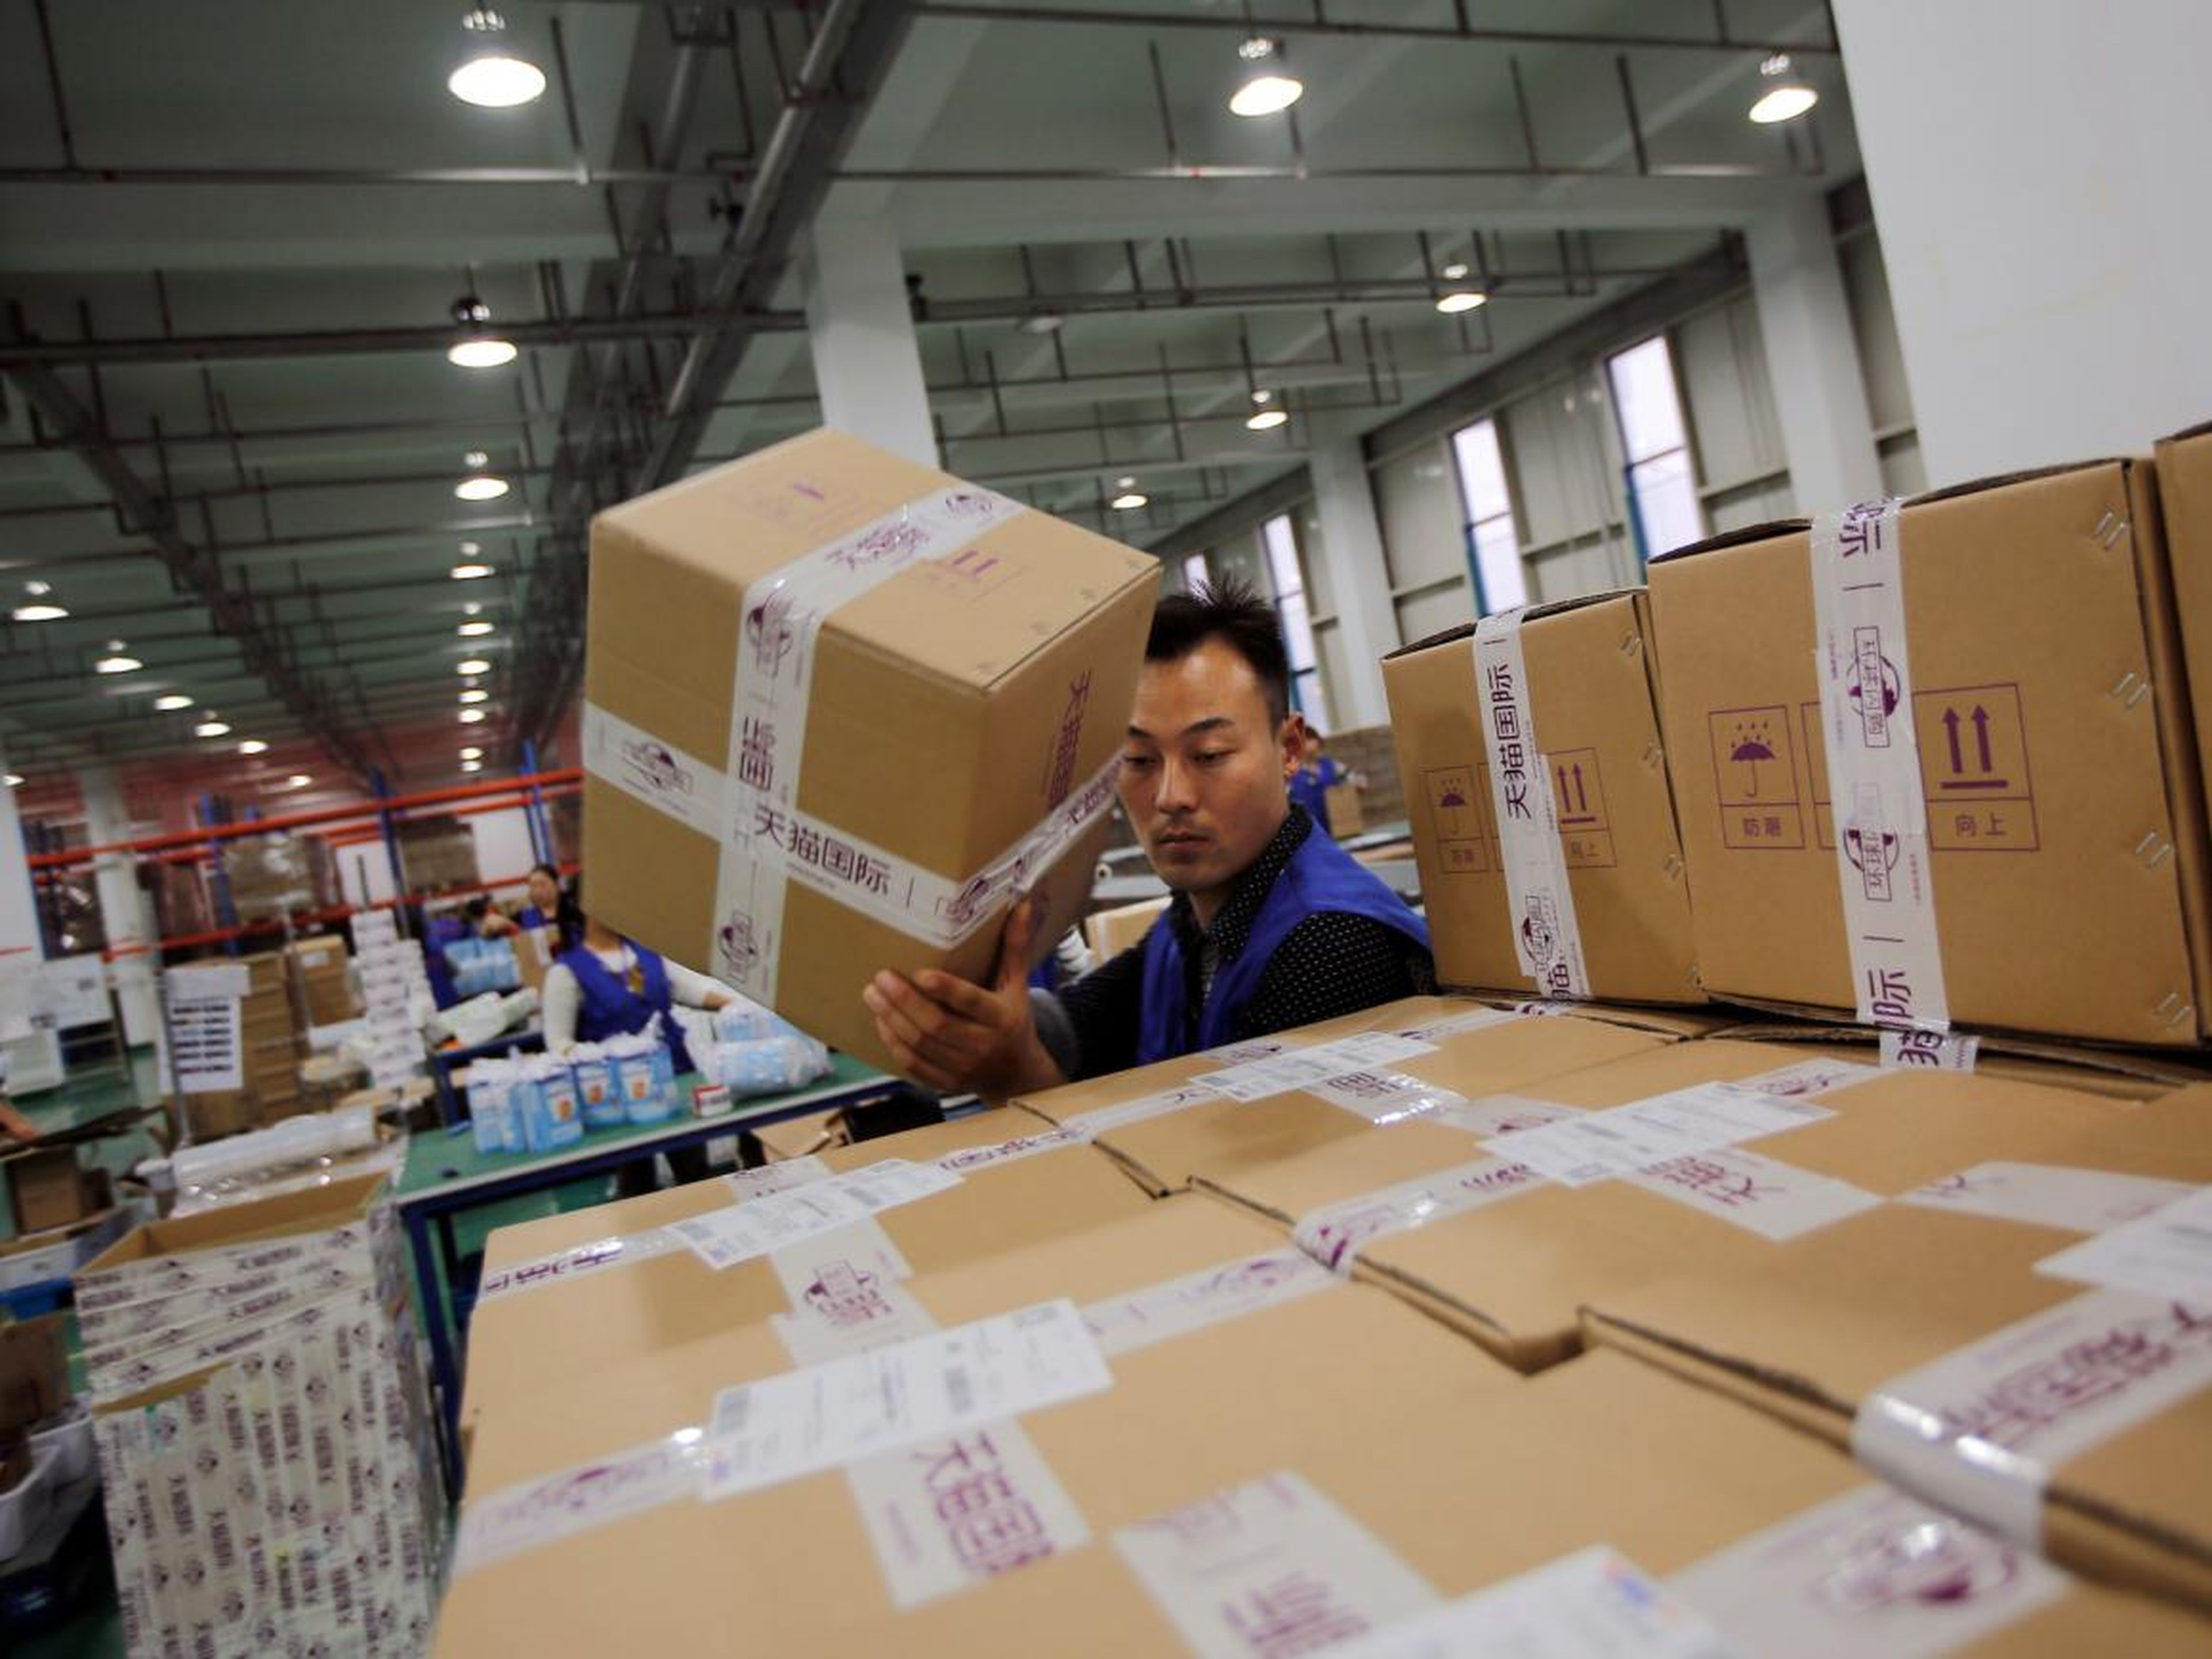 An employee works in an Alibaba warehouse in China.